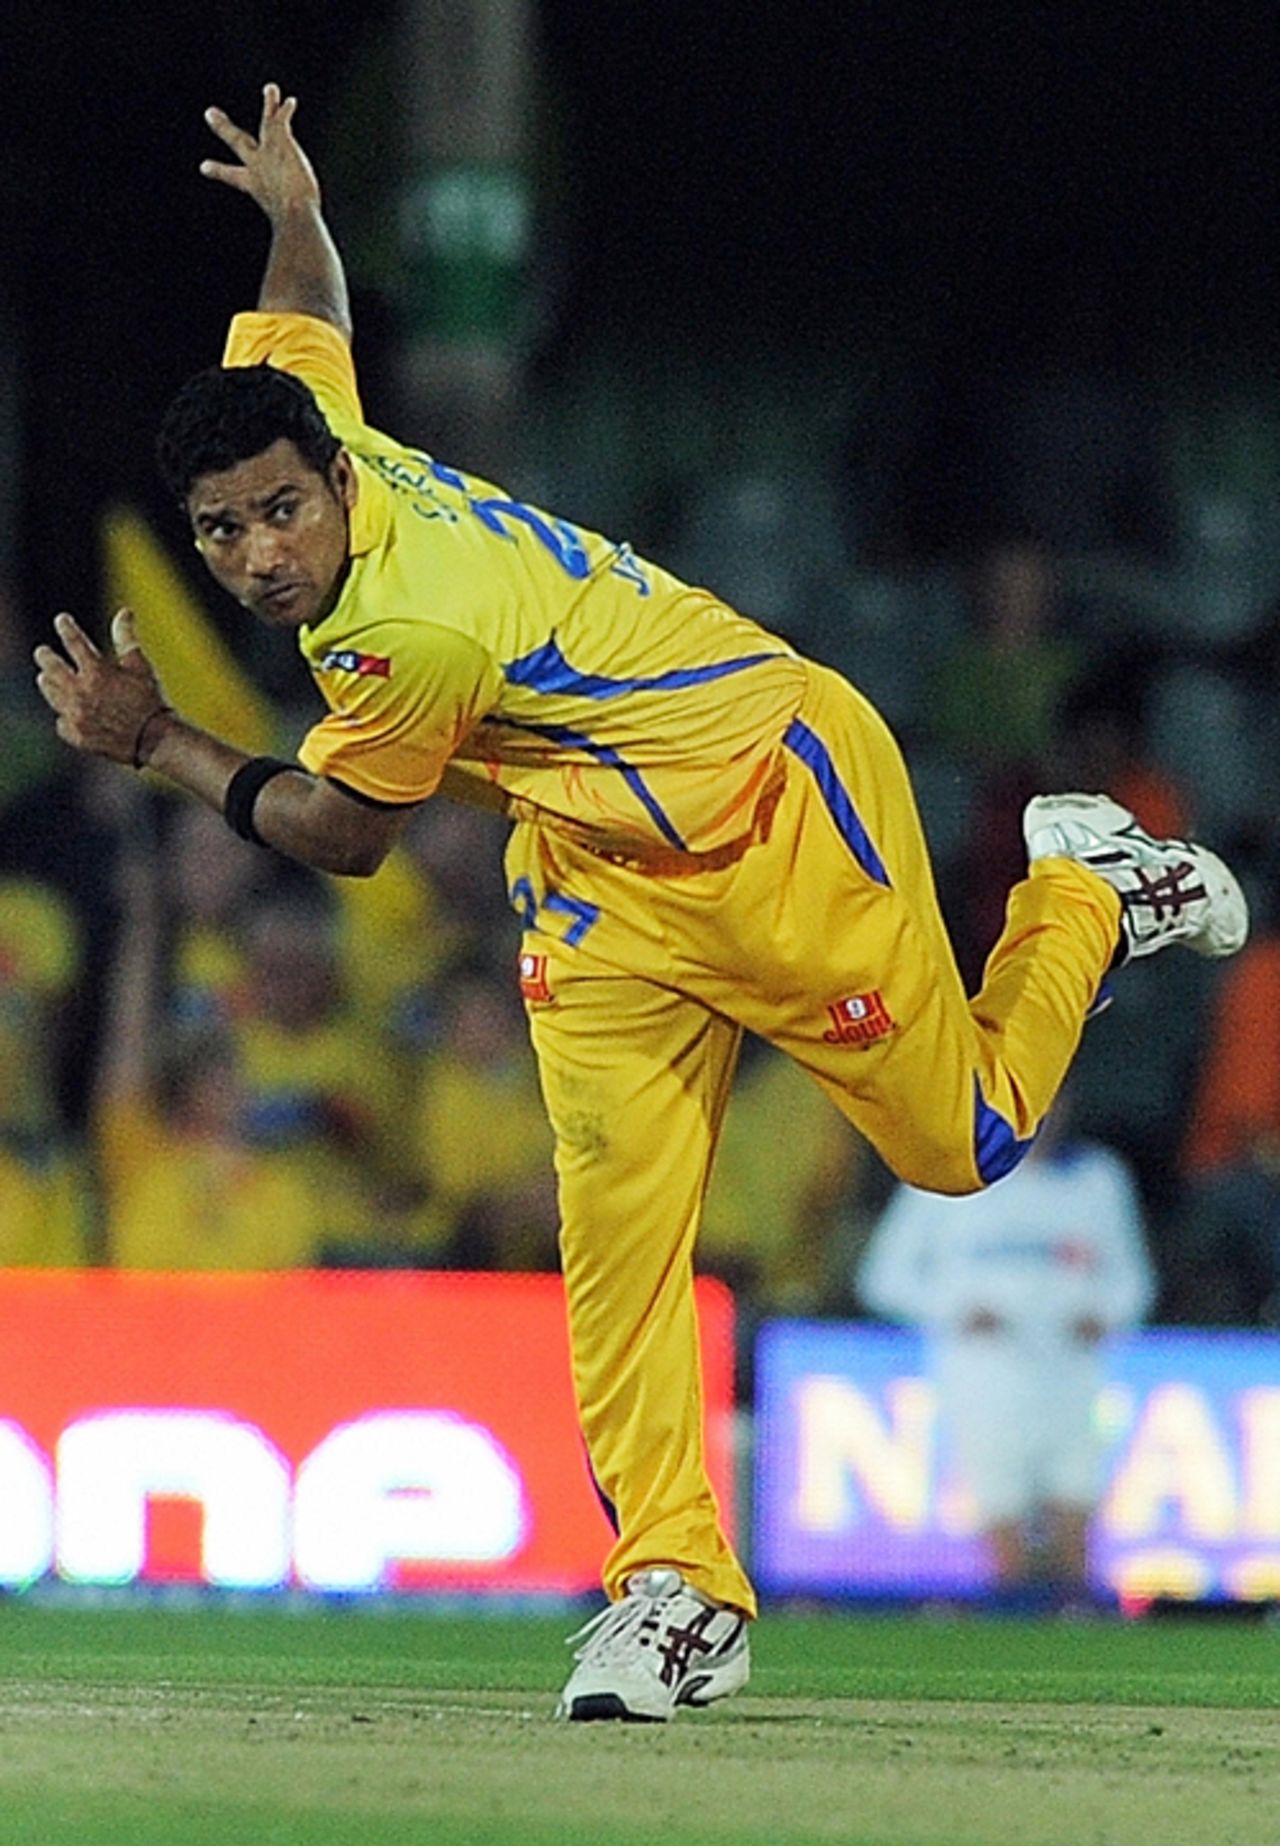 Shadab Jakati in action, Chennai Super Kings v Deccan Chargers, IPL, 29th match, East London, May 4, 2009